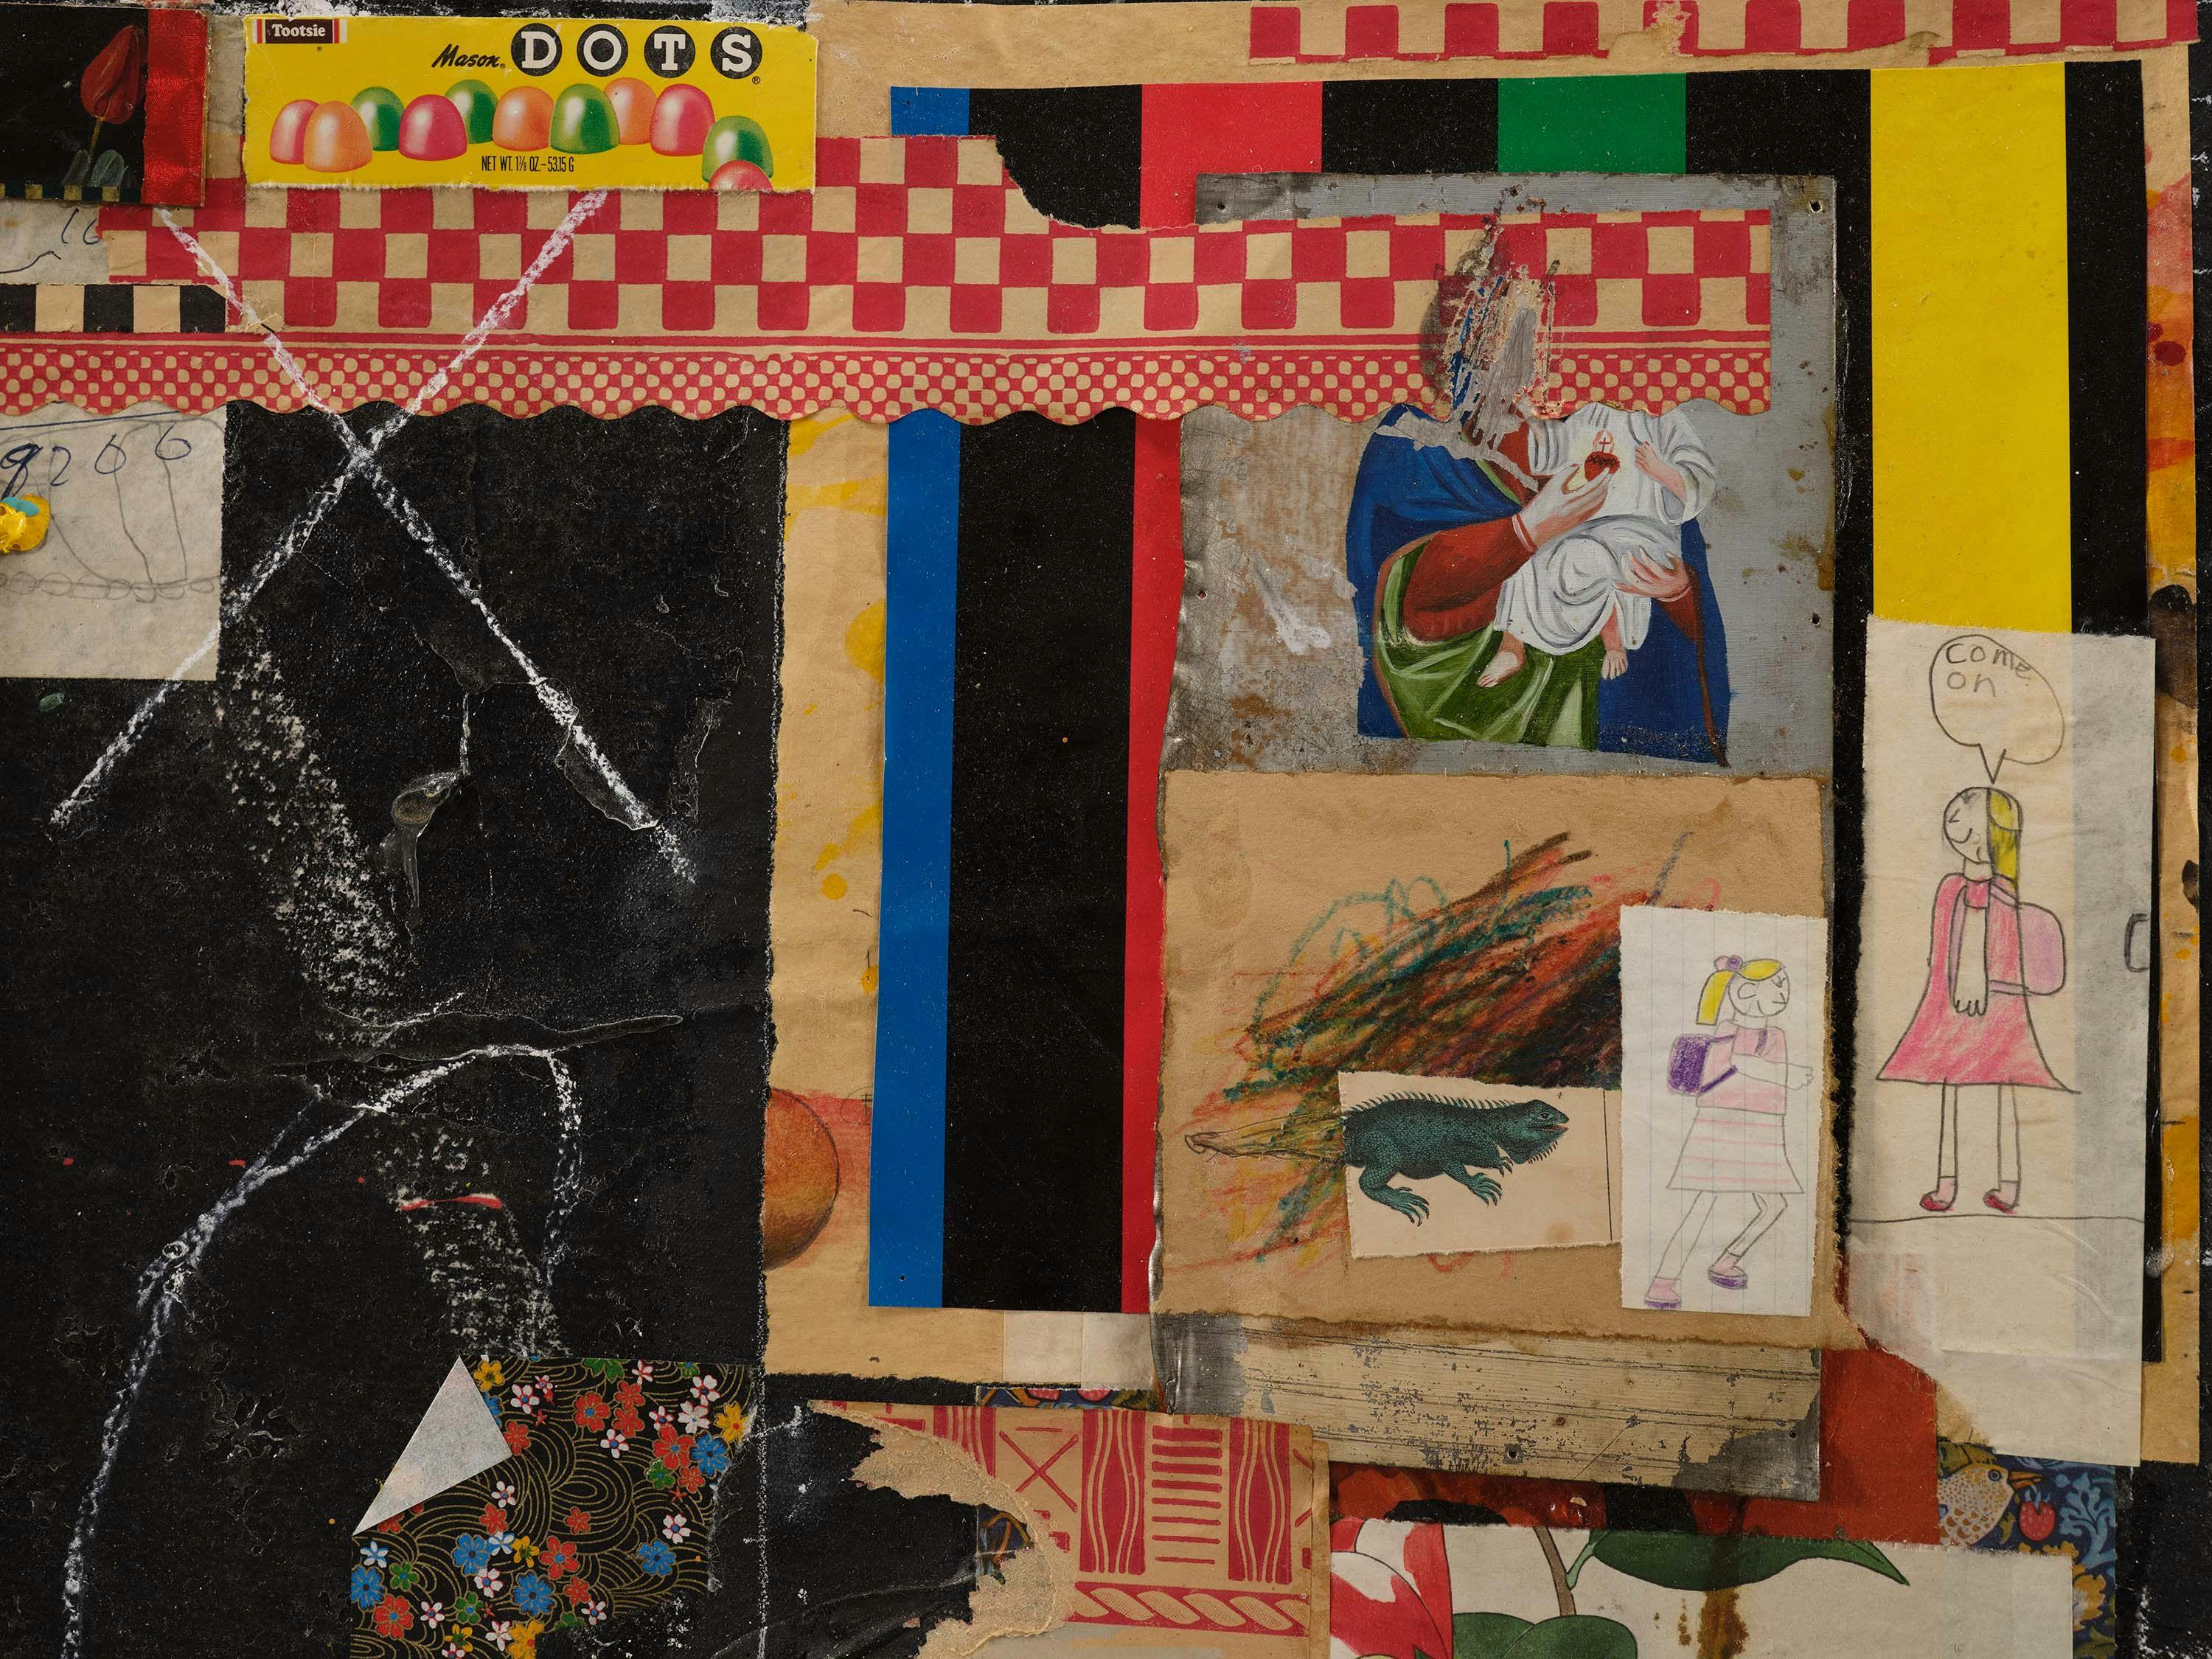 A detail from a mixed media artwork by Raymond Saunders, titled Jacob Lawrence, Romare Bearden, American Painting, dated 1988.